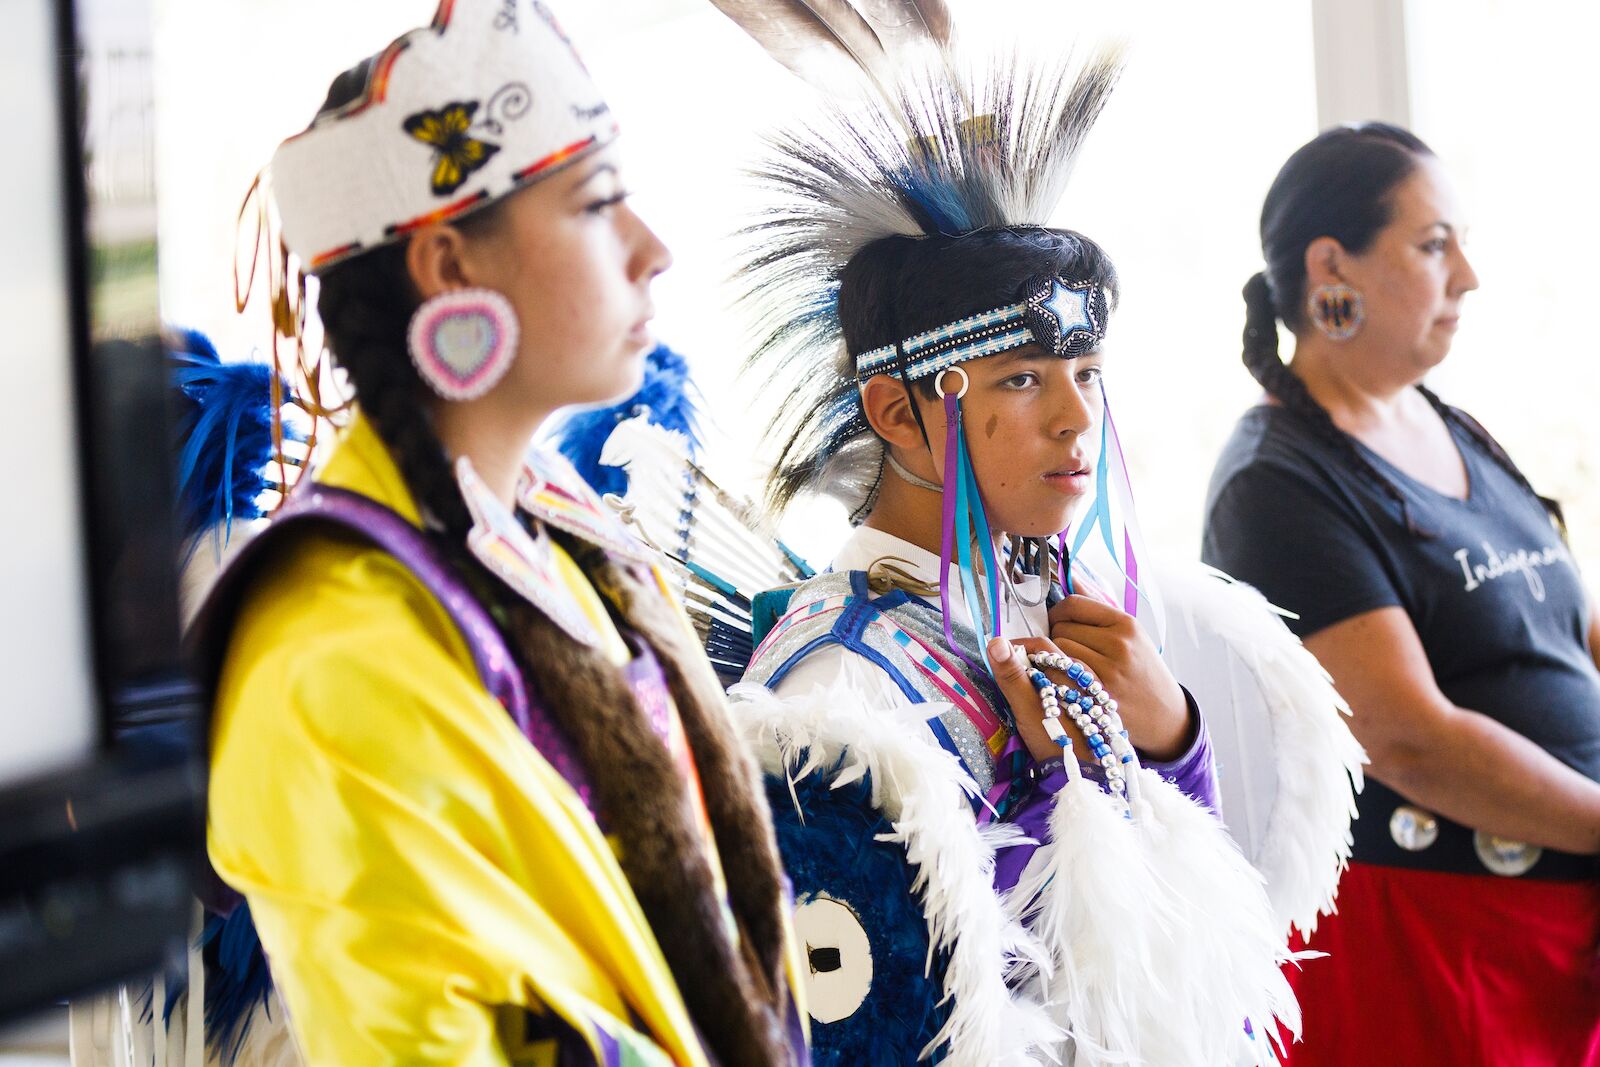 The Young Family performs at the Visit Native California luncheon in Palm Springs, California on September 14, 2022.